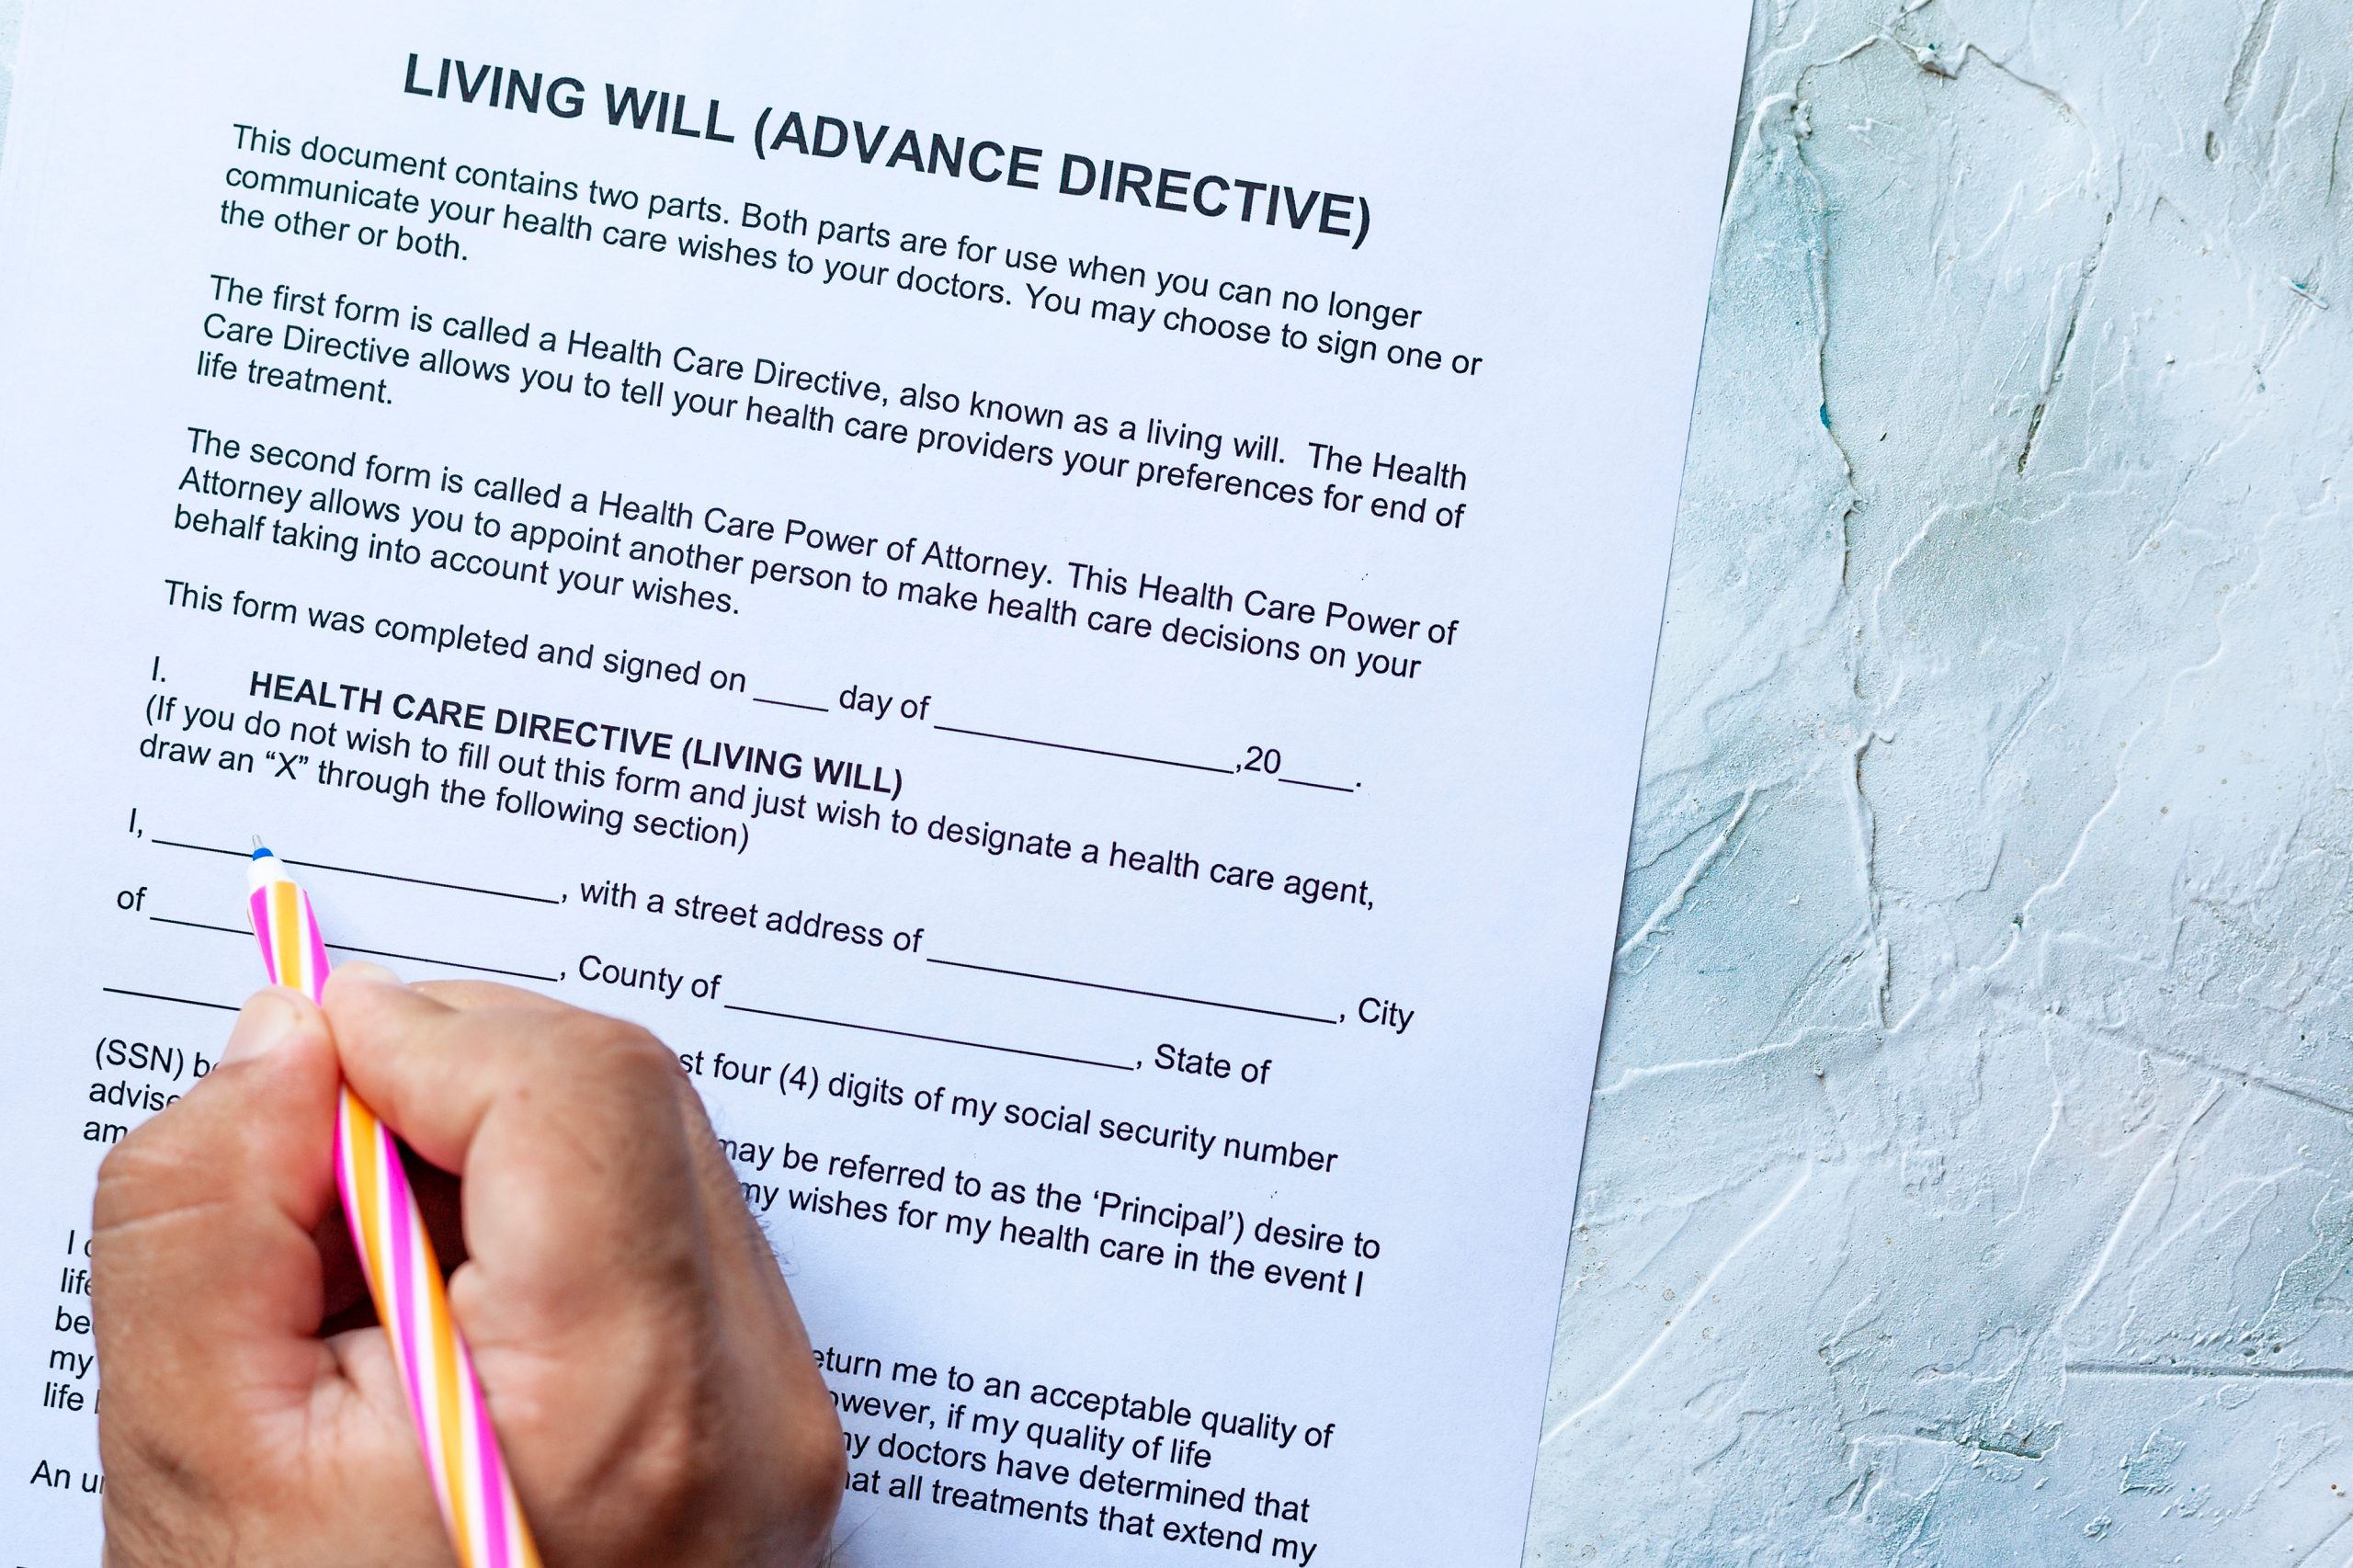 Personal Directive - Living Will document being completed